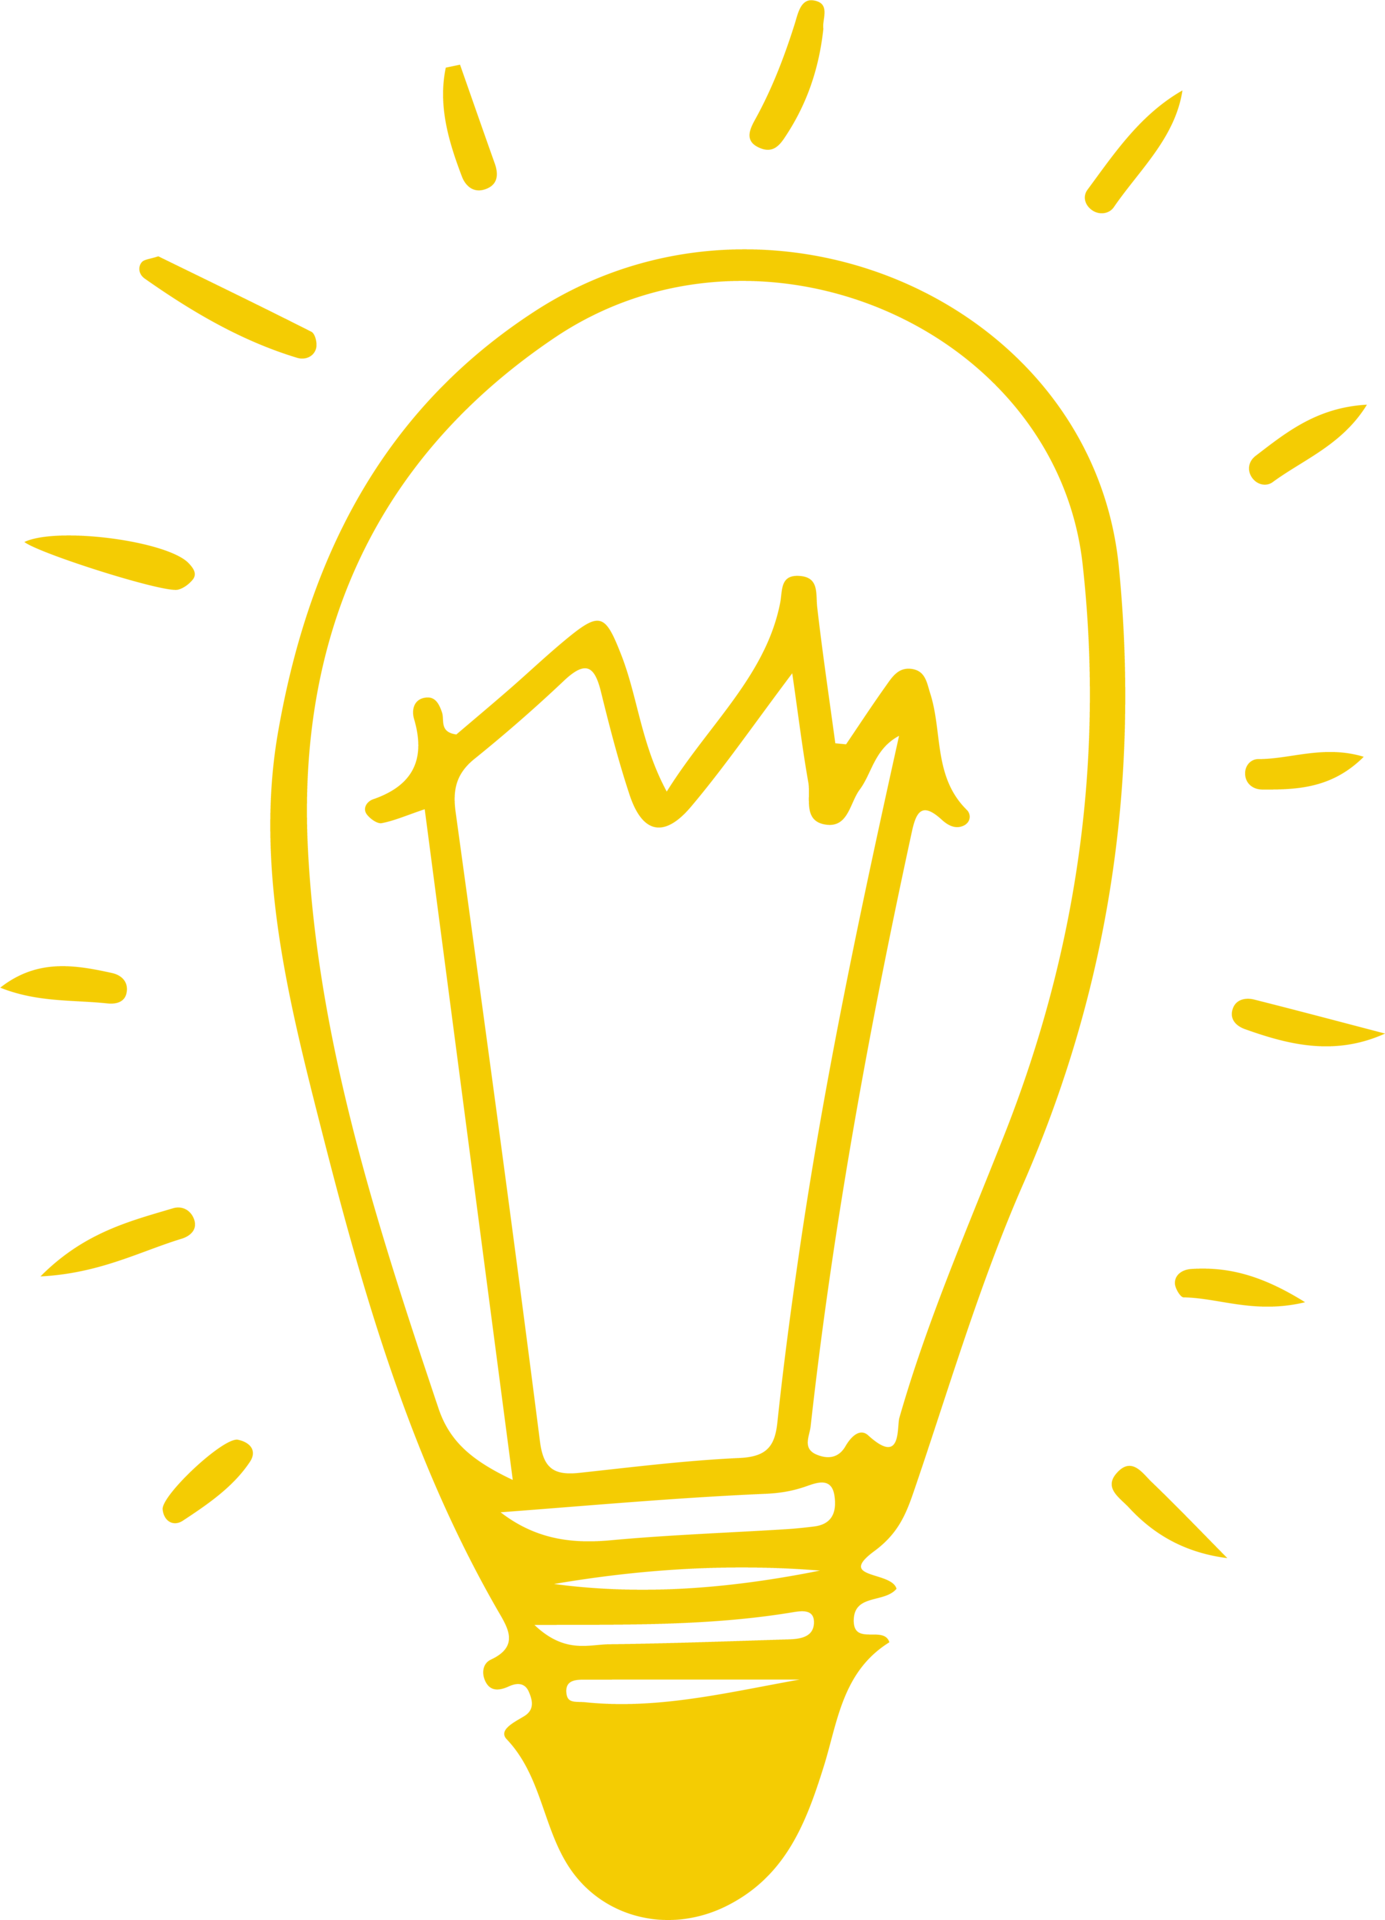 light bulb icon png